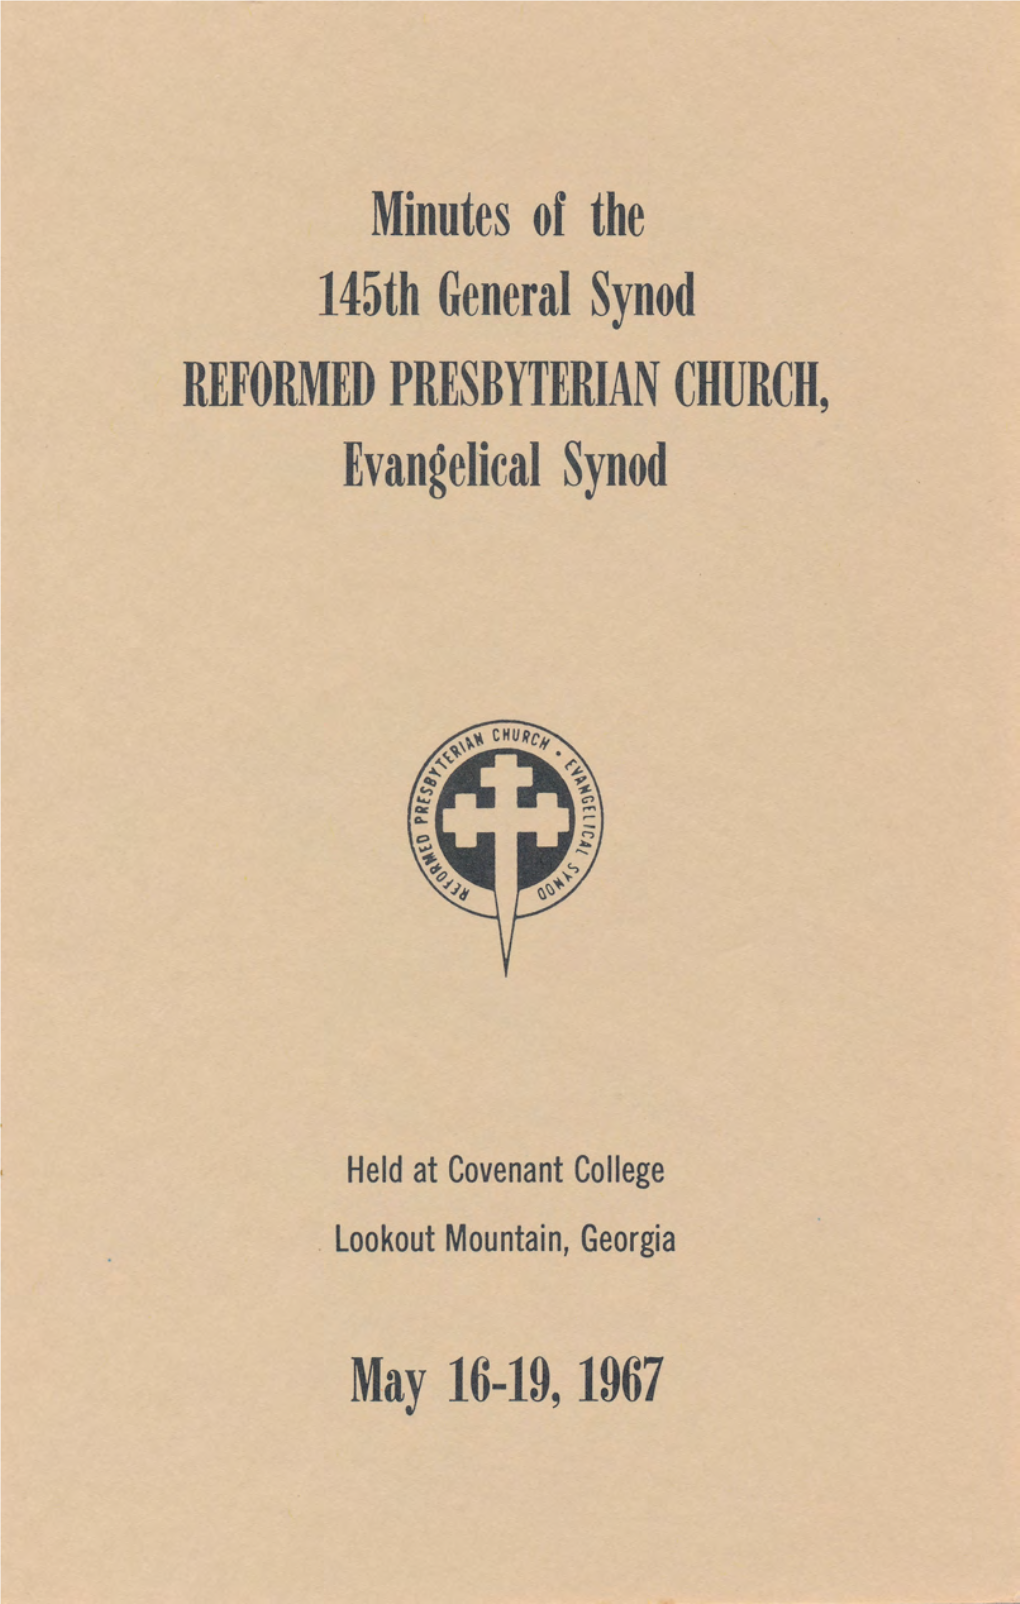 Minutes of the 14Ath General Synod REFORMED PRESBYTERIAN CHURCH, Evangelical Synod